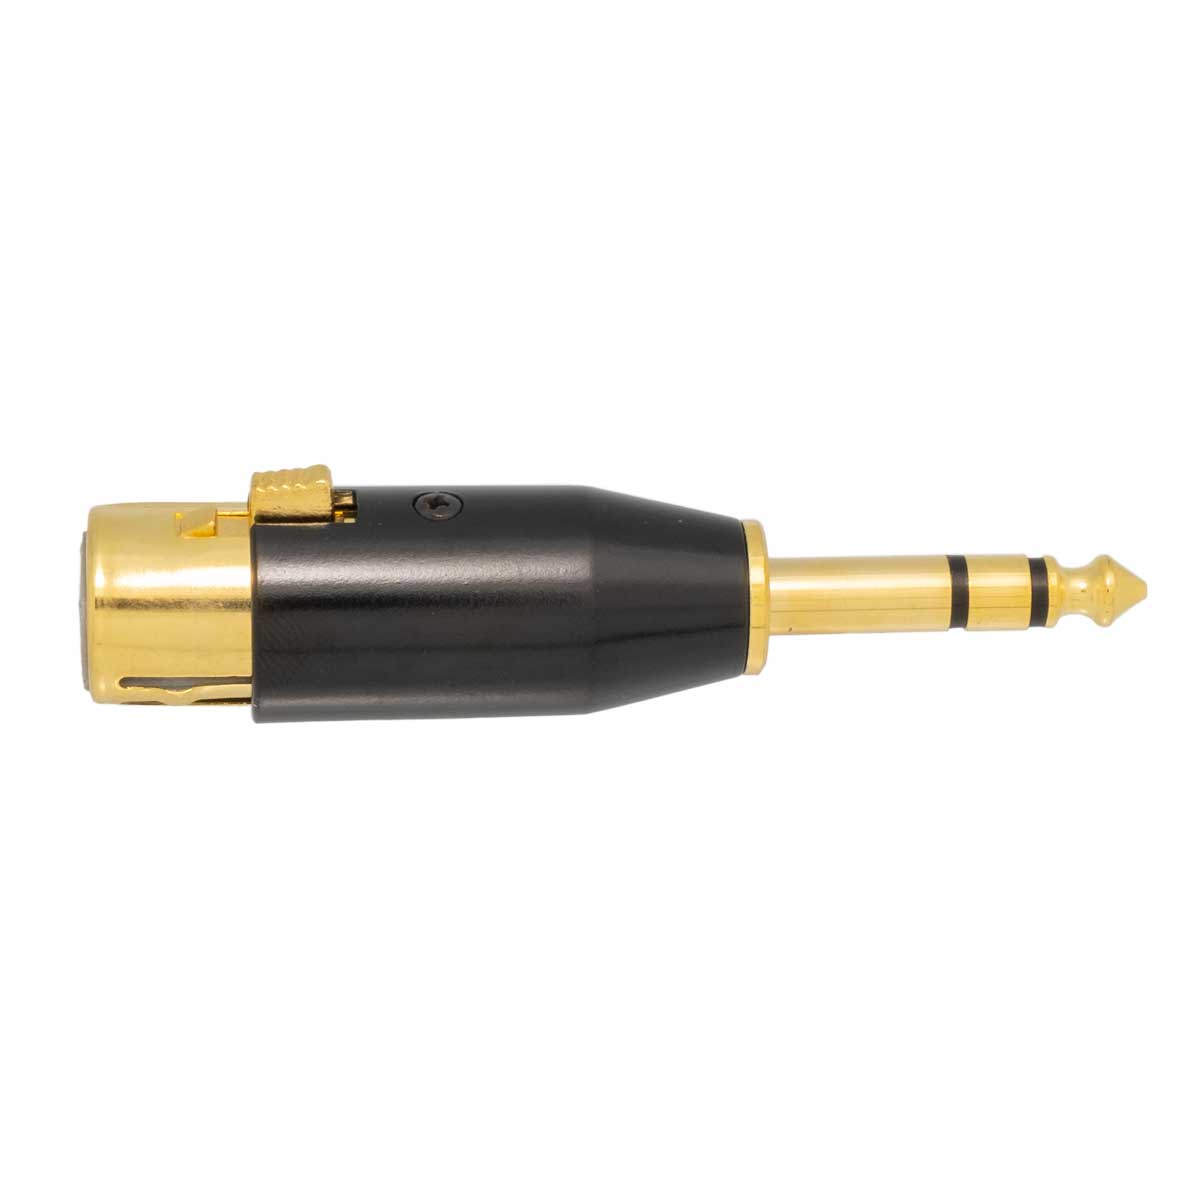 1/4" STEREO PLUG TO 3P MIC MALE, GOLD PLATED